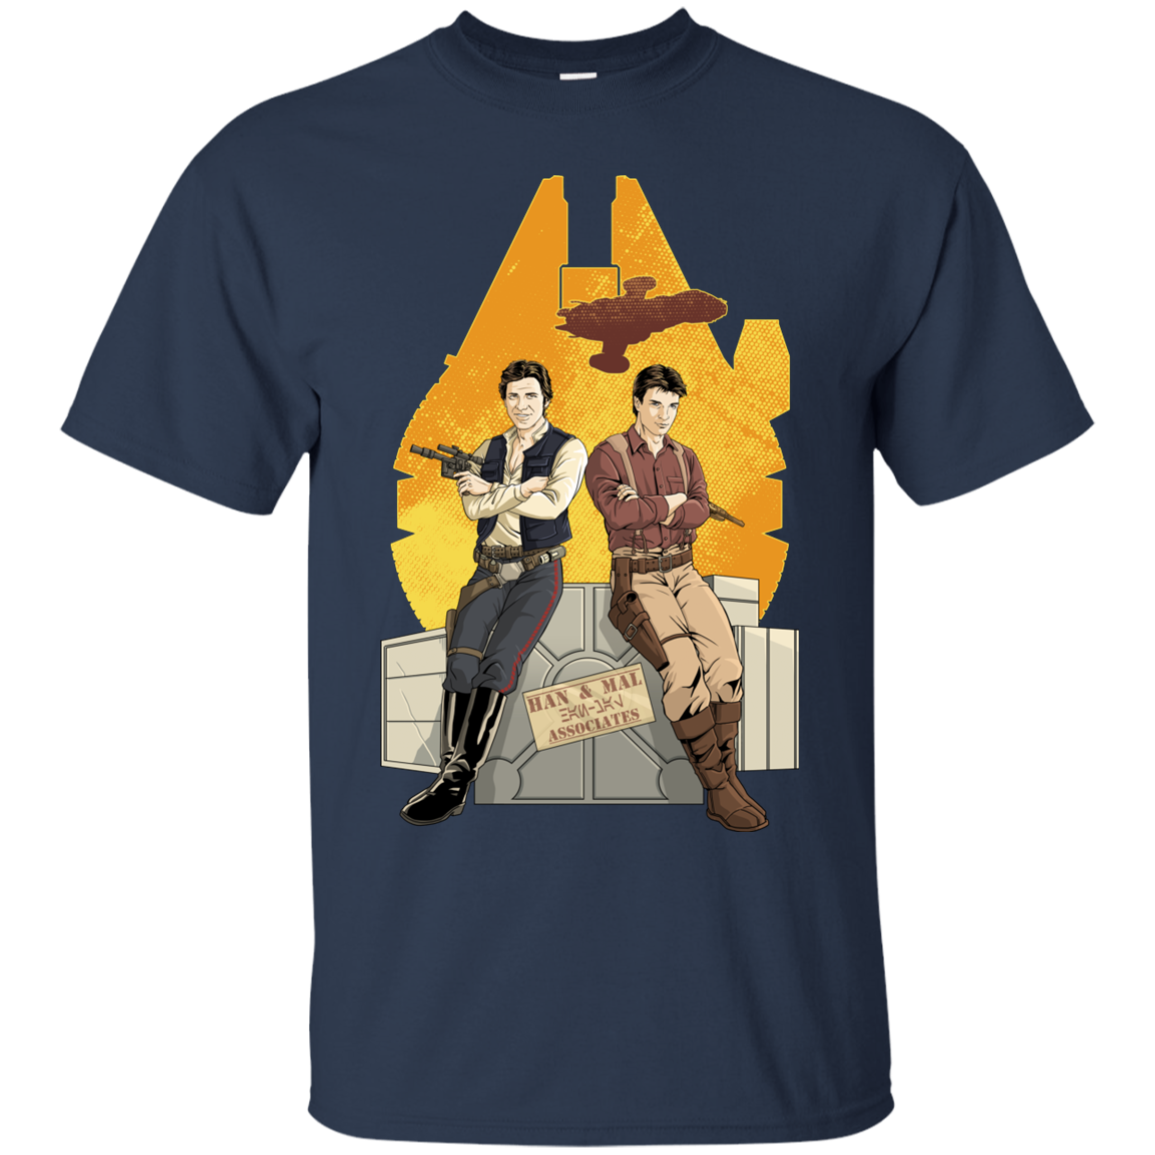 Partners In Crime T-Shirt